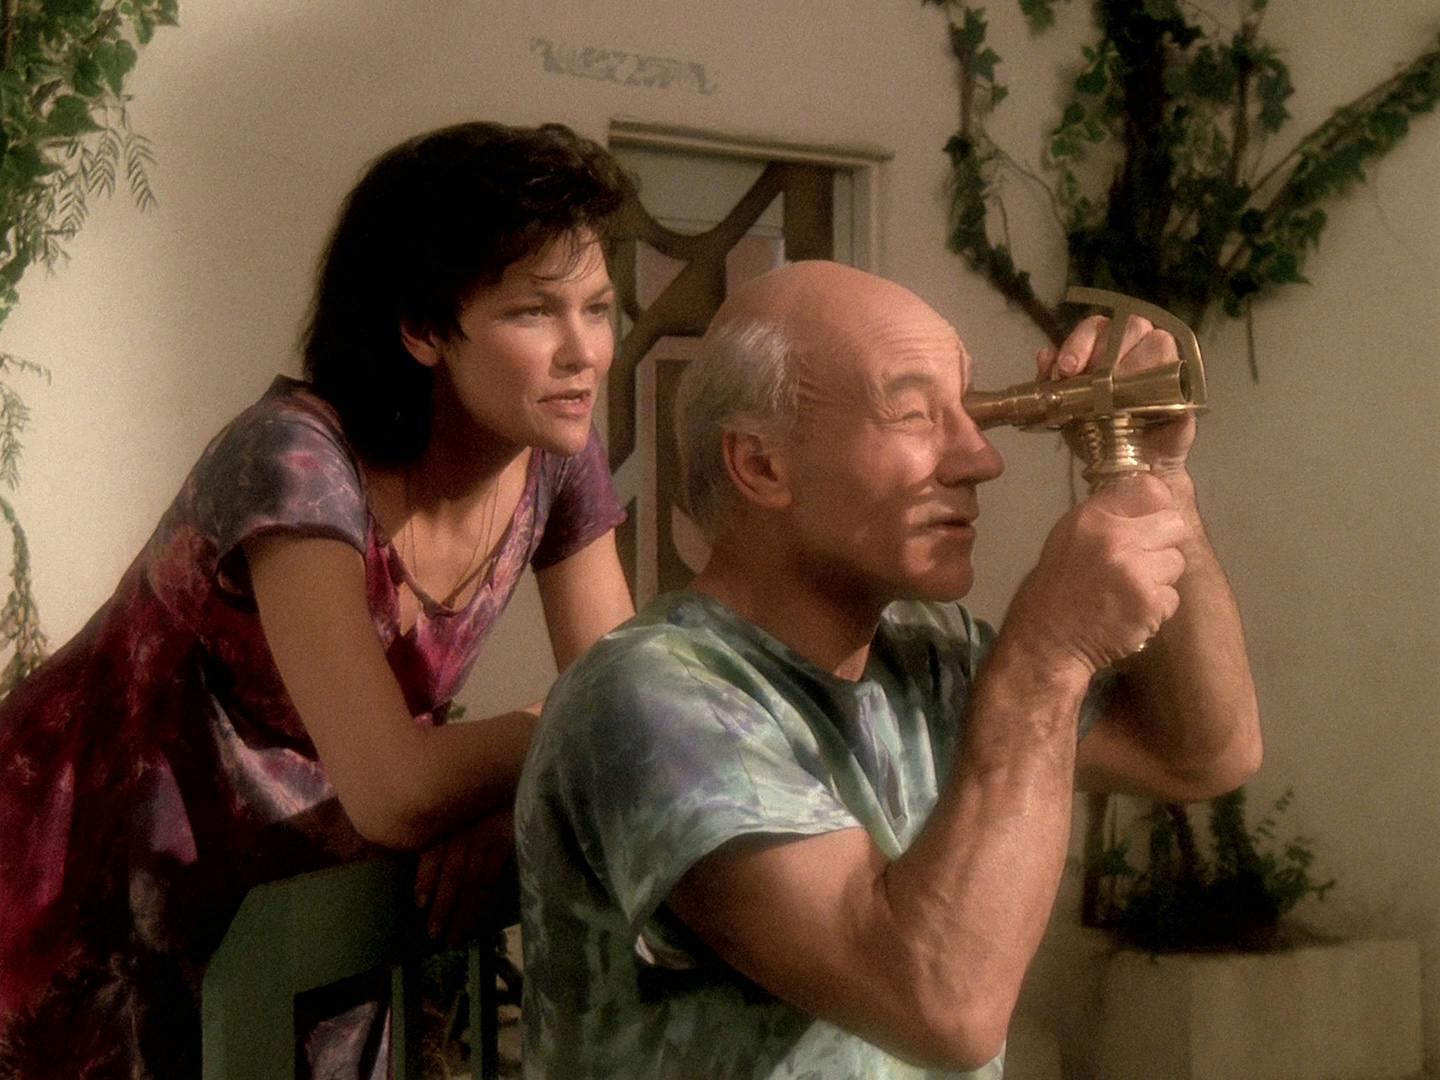 Picard as Kamin in his mindscape looks out through a telescope as his wife leans on the back of his chair behind him in 'The Inner Light'